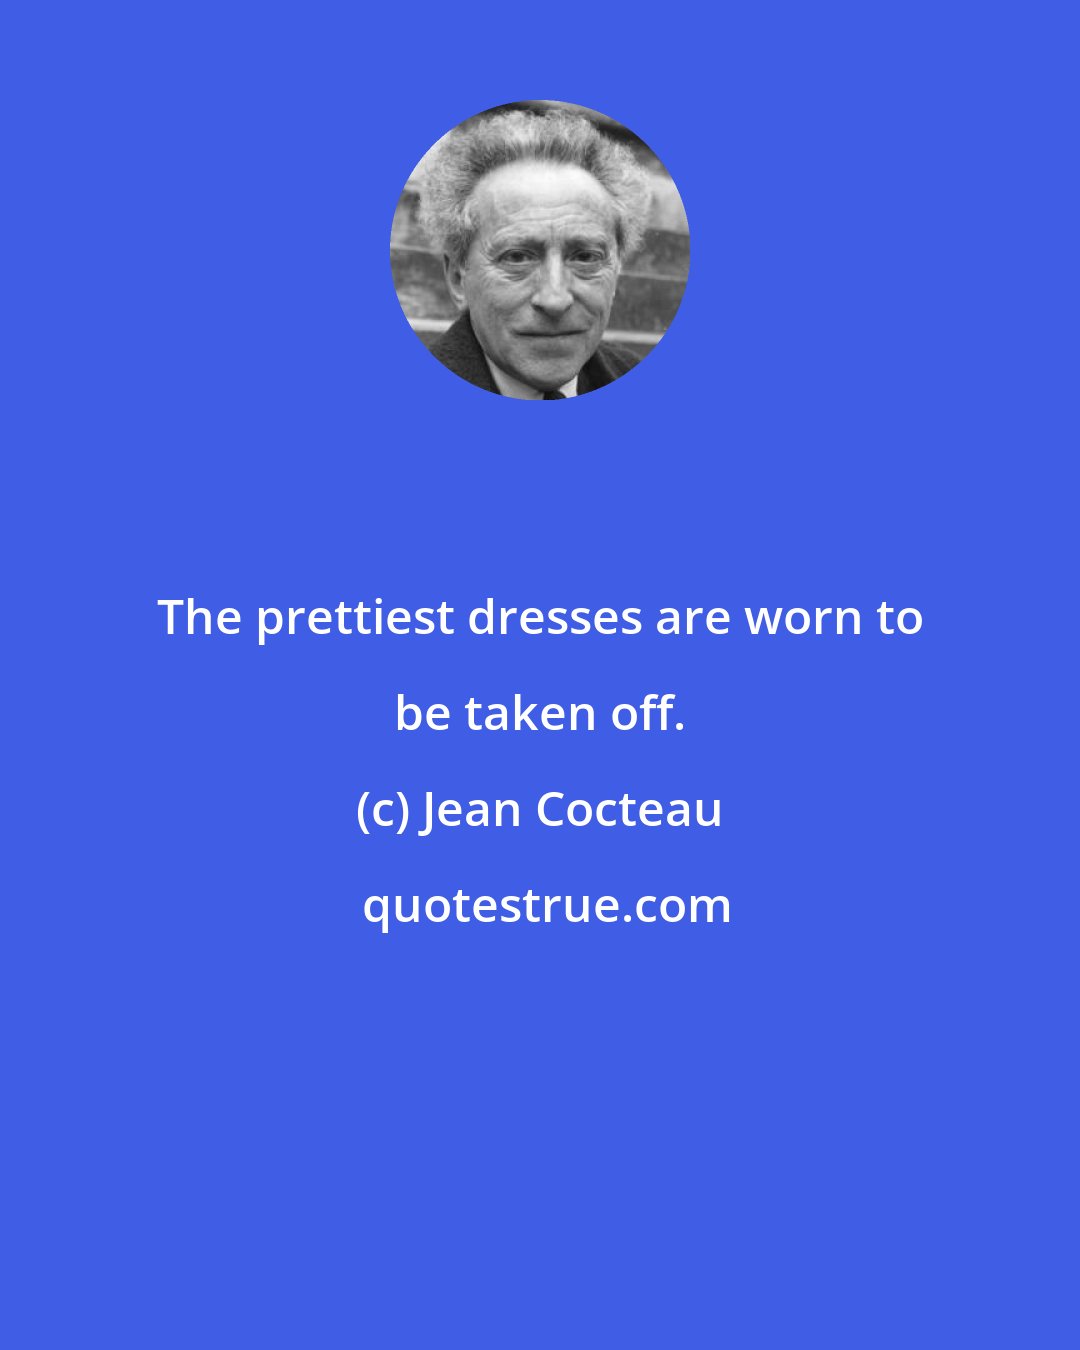 Jean Cocteau: The prettiest dresses are worn to be taken off.